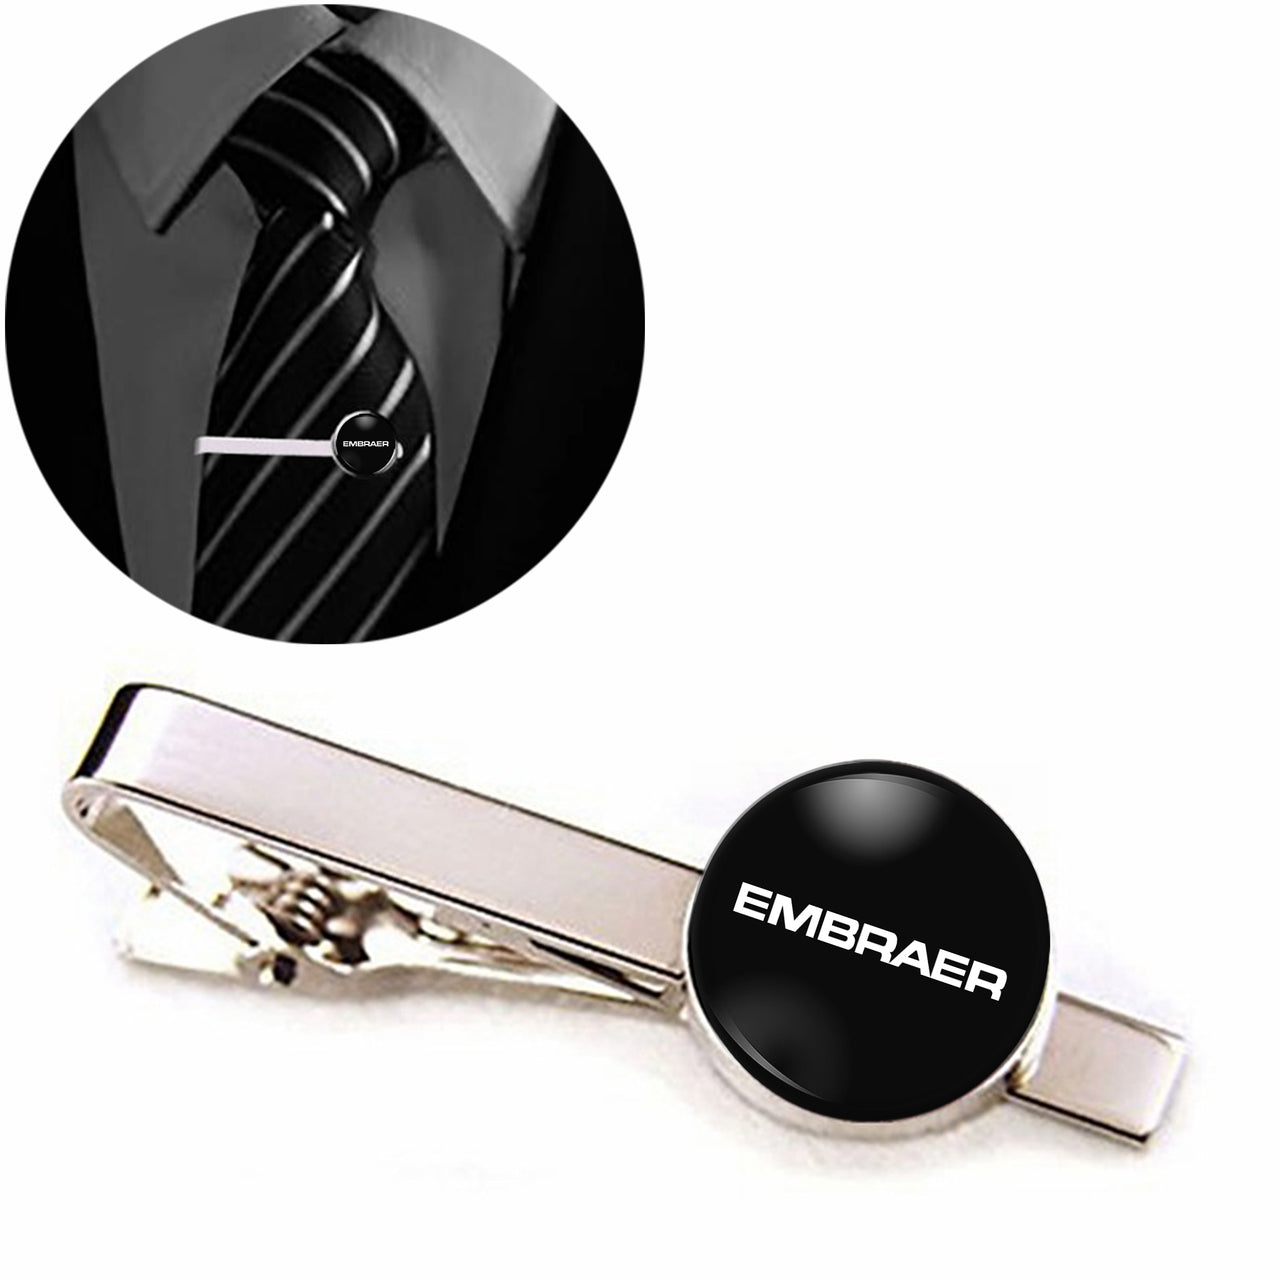 Embraer & Text Designed Tie Clips